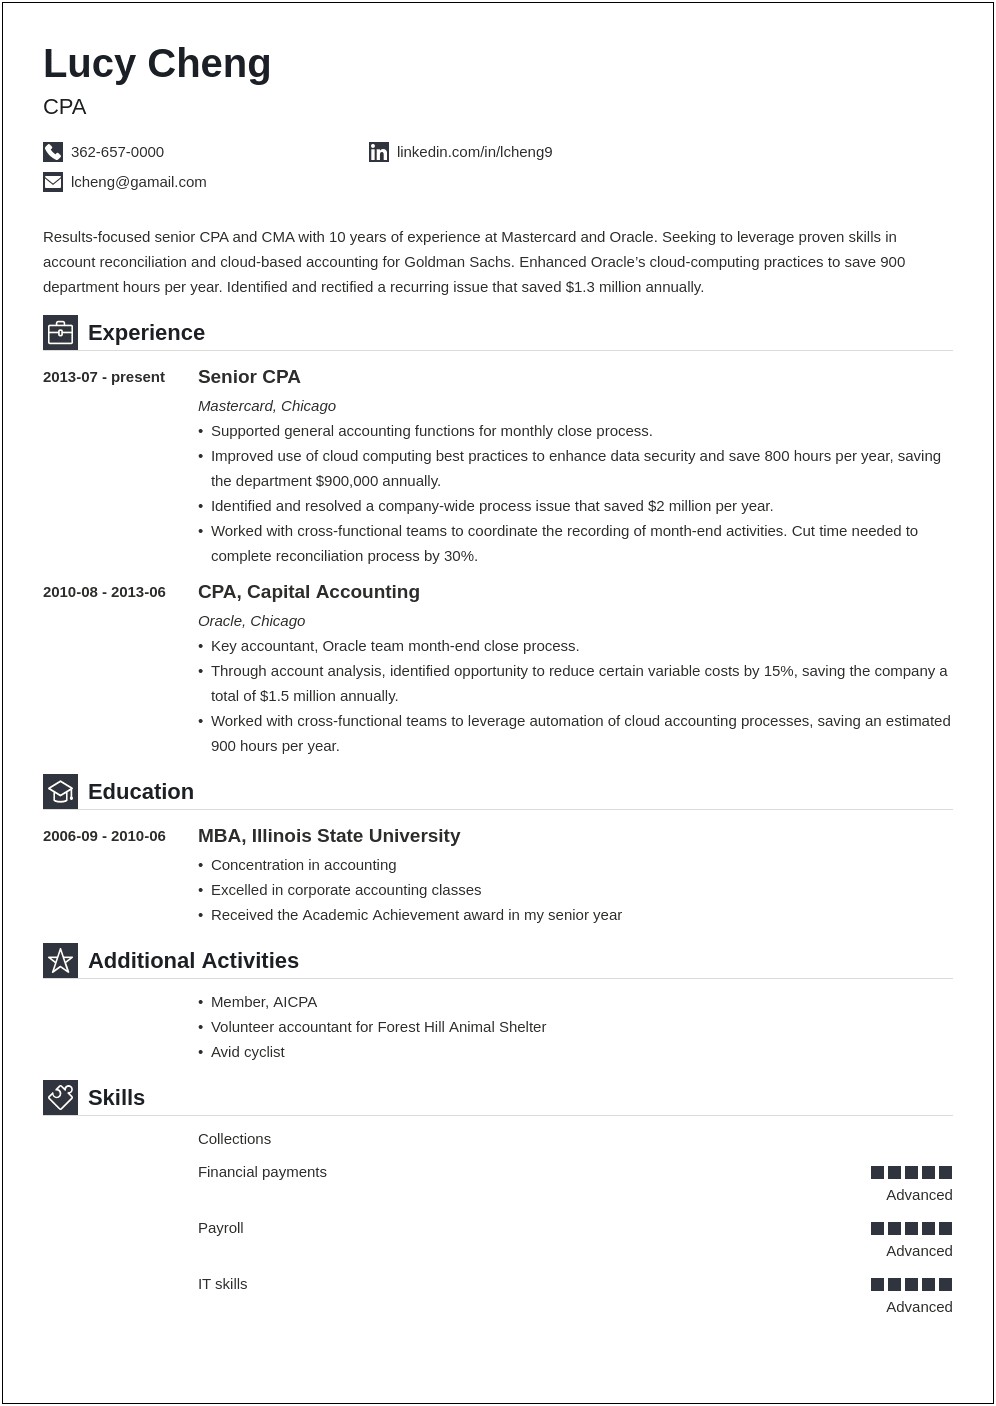 Prepare Professional Resume Online For Free